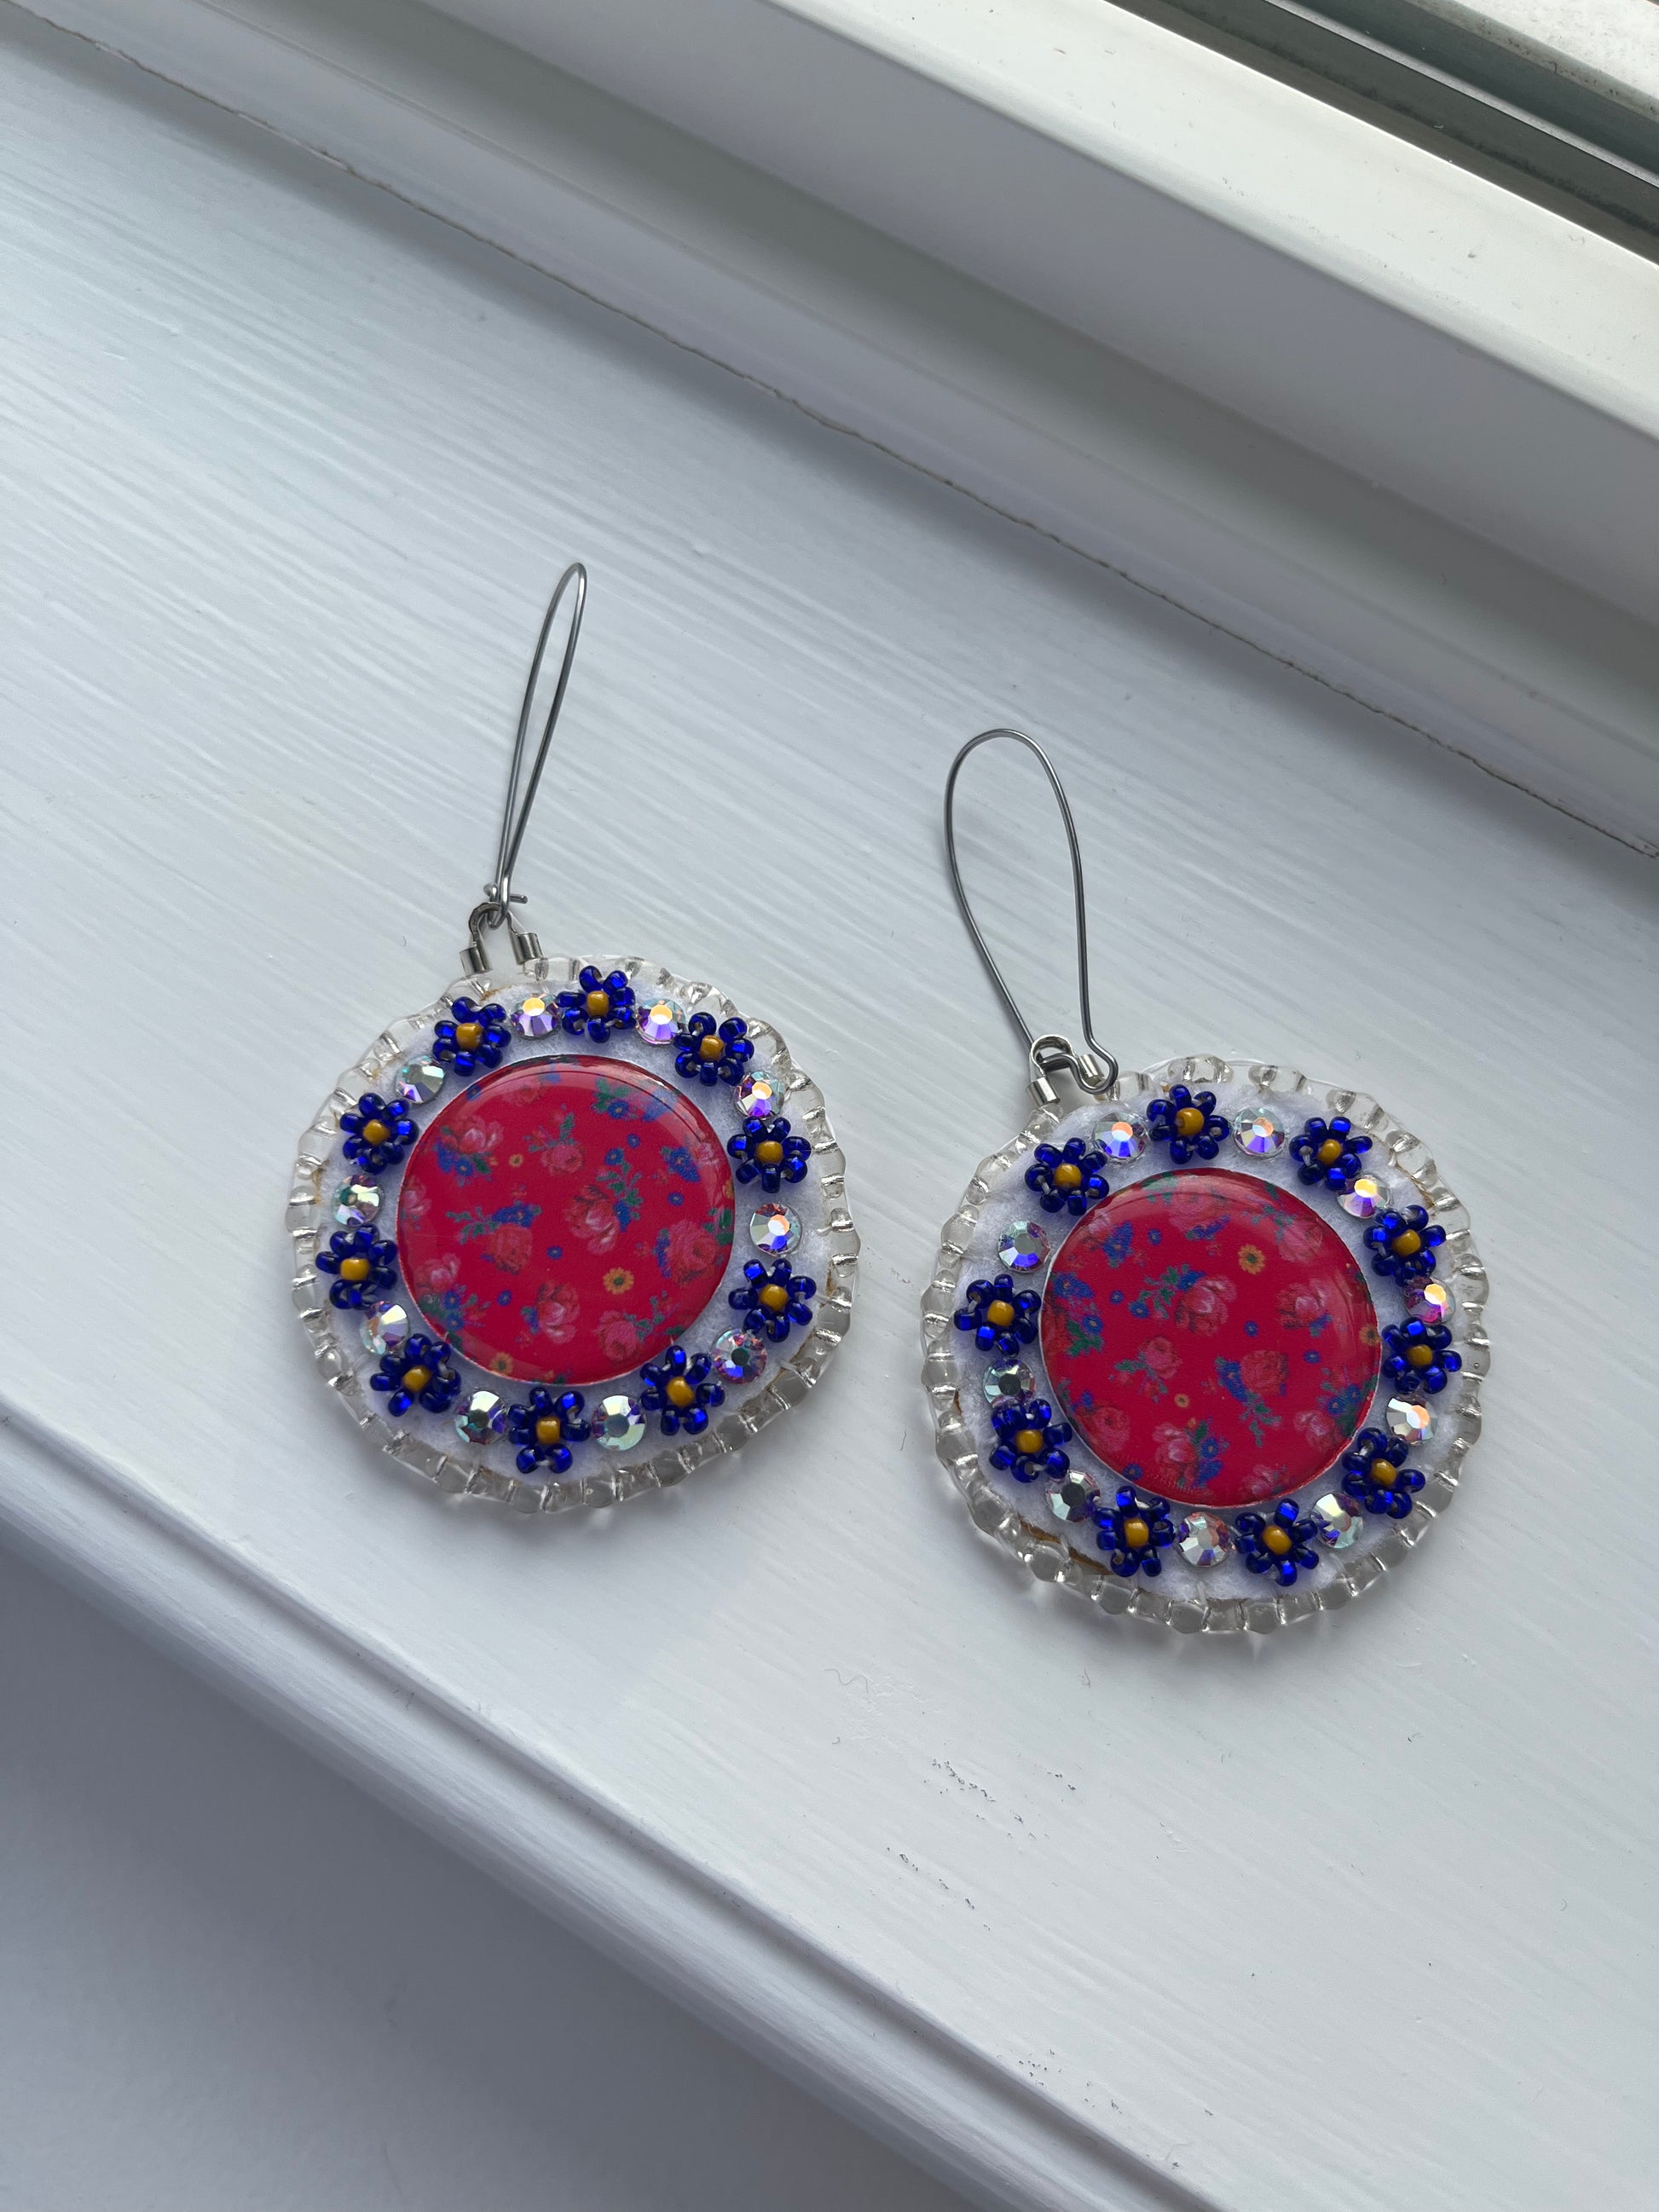 These full glam earrings will check that sparkle box for any diva. Hypoallergenic kidney hooks. Backed with soft deer skin and covered in Swarovski iridescent jewels. 